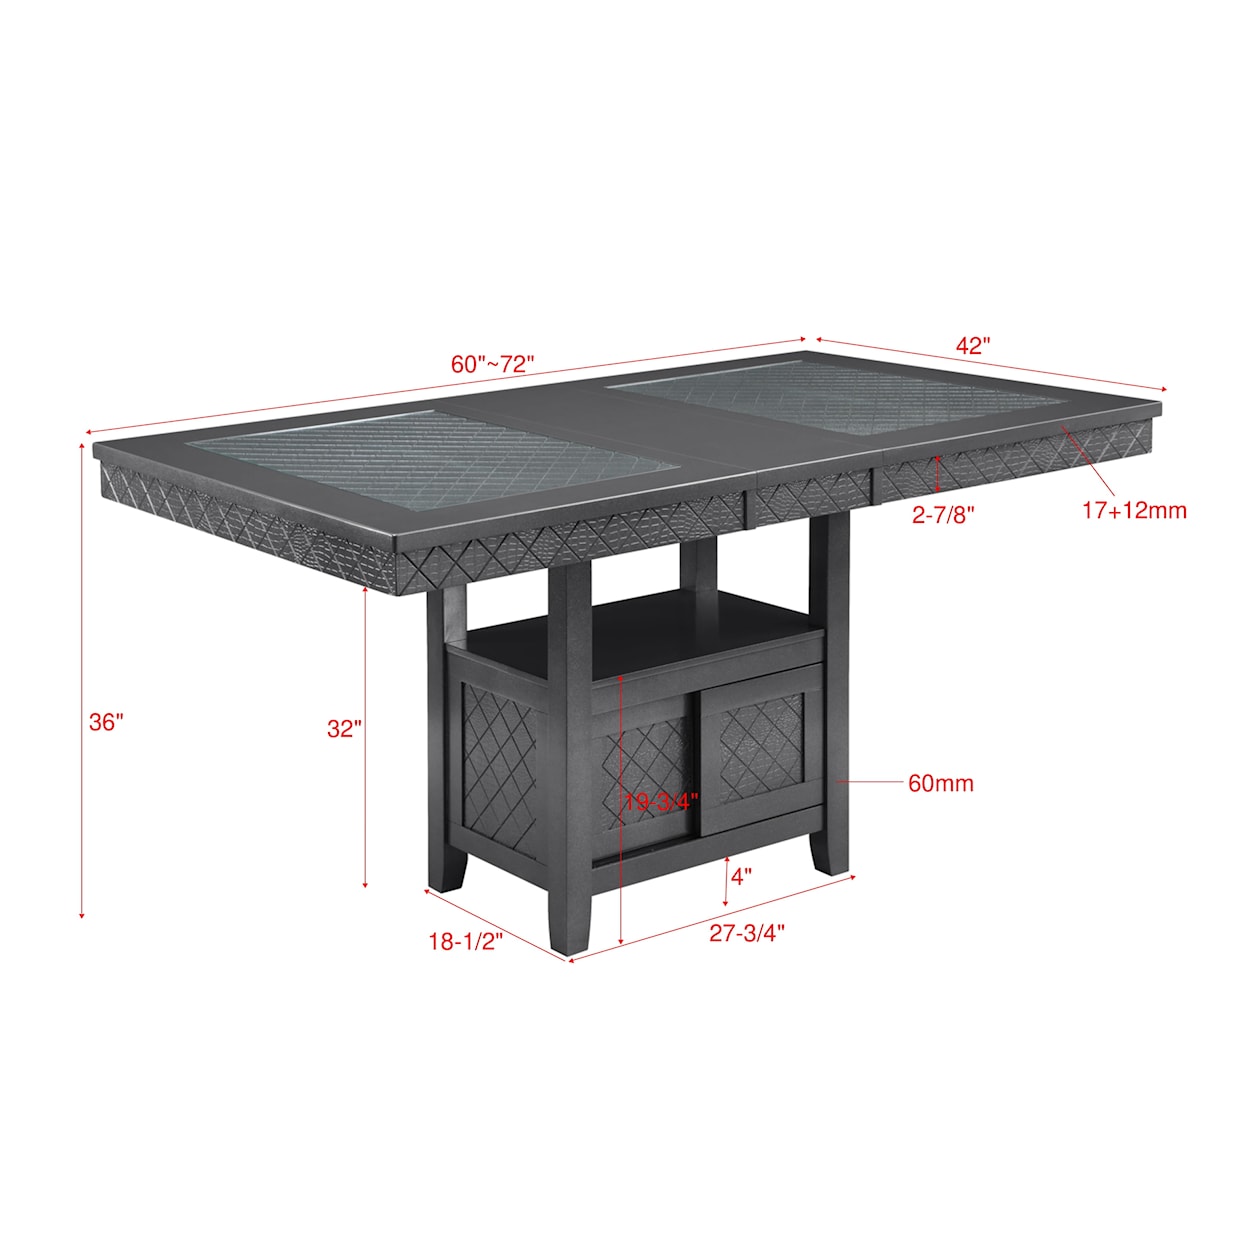 CM Bankston Counter Height Dining Table